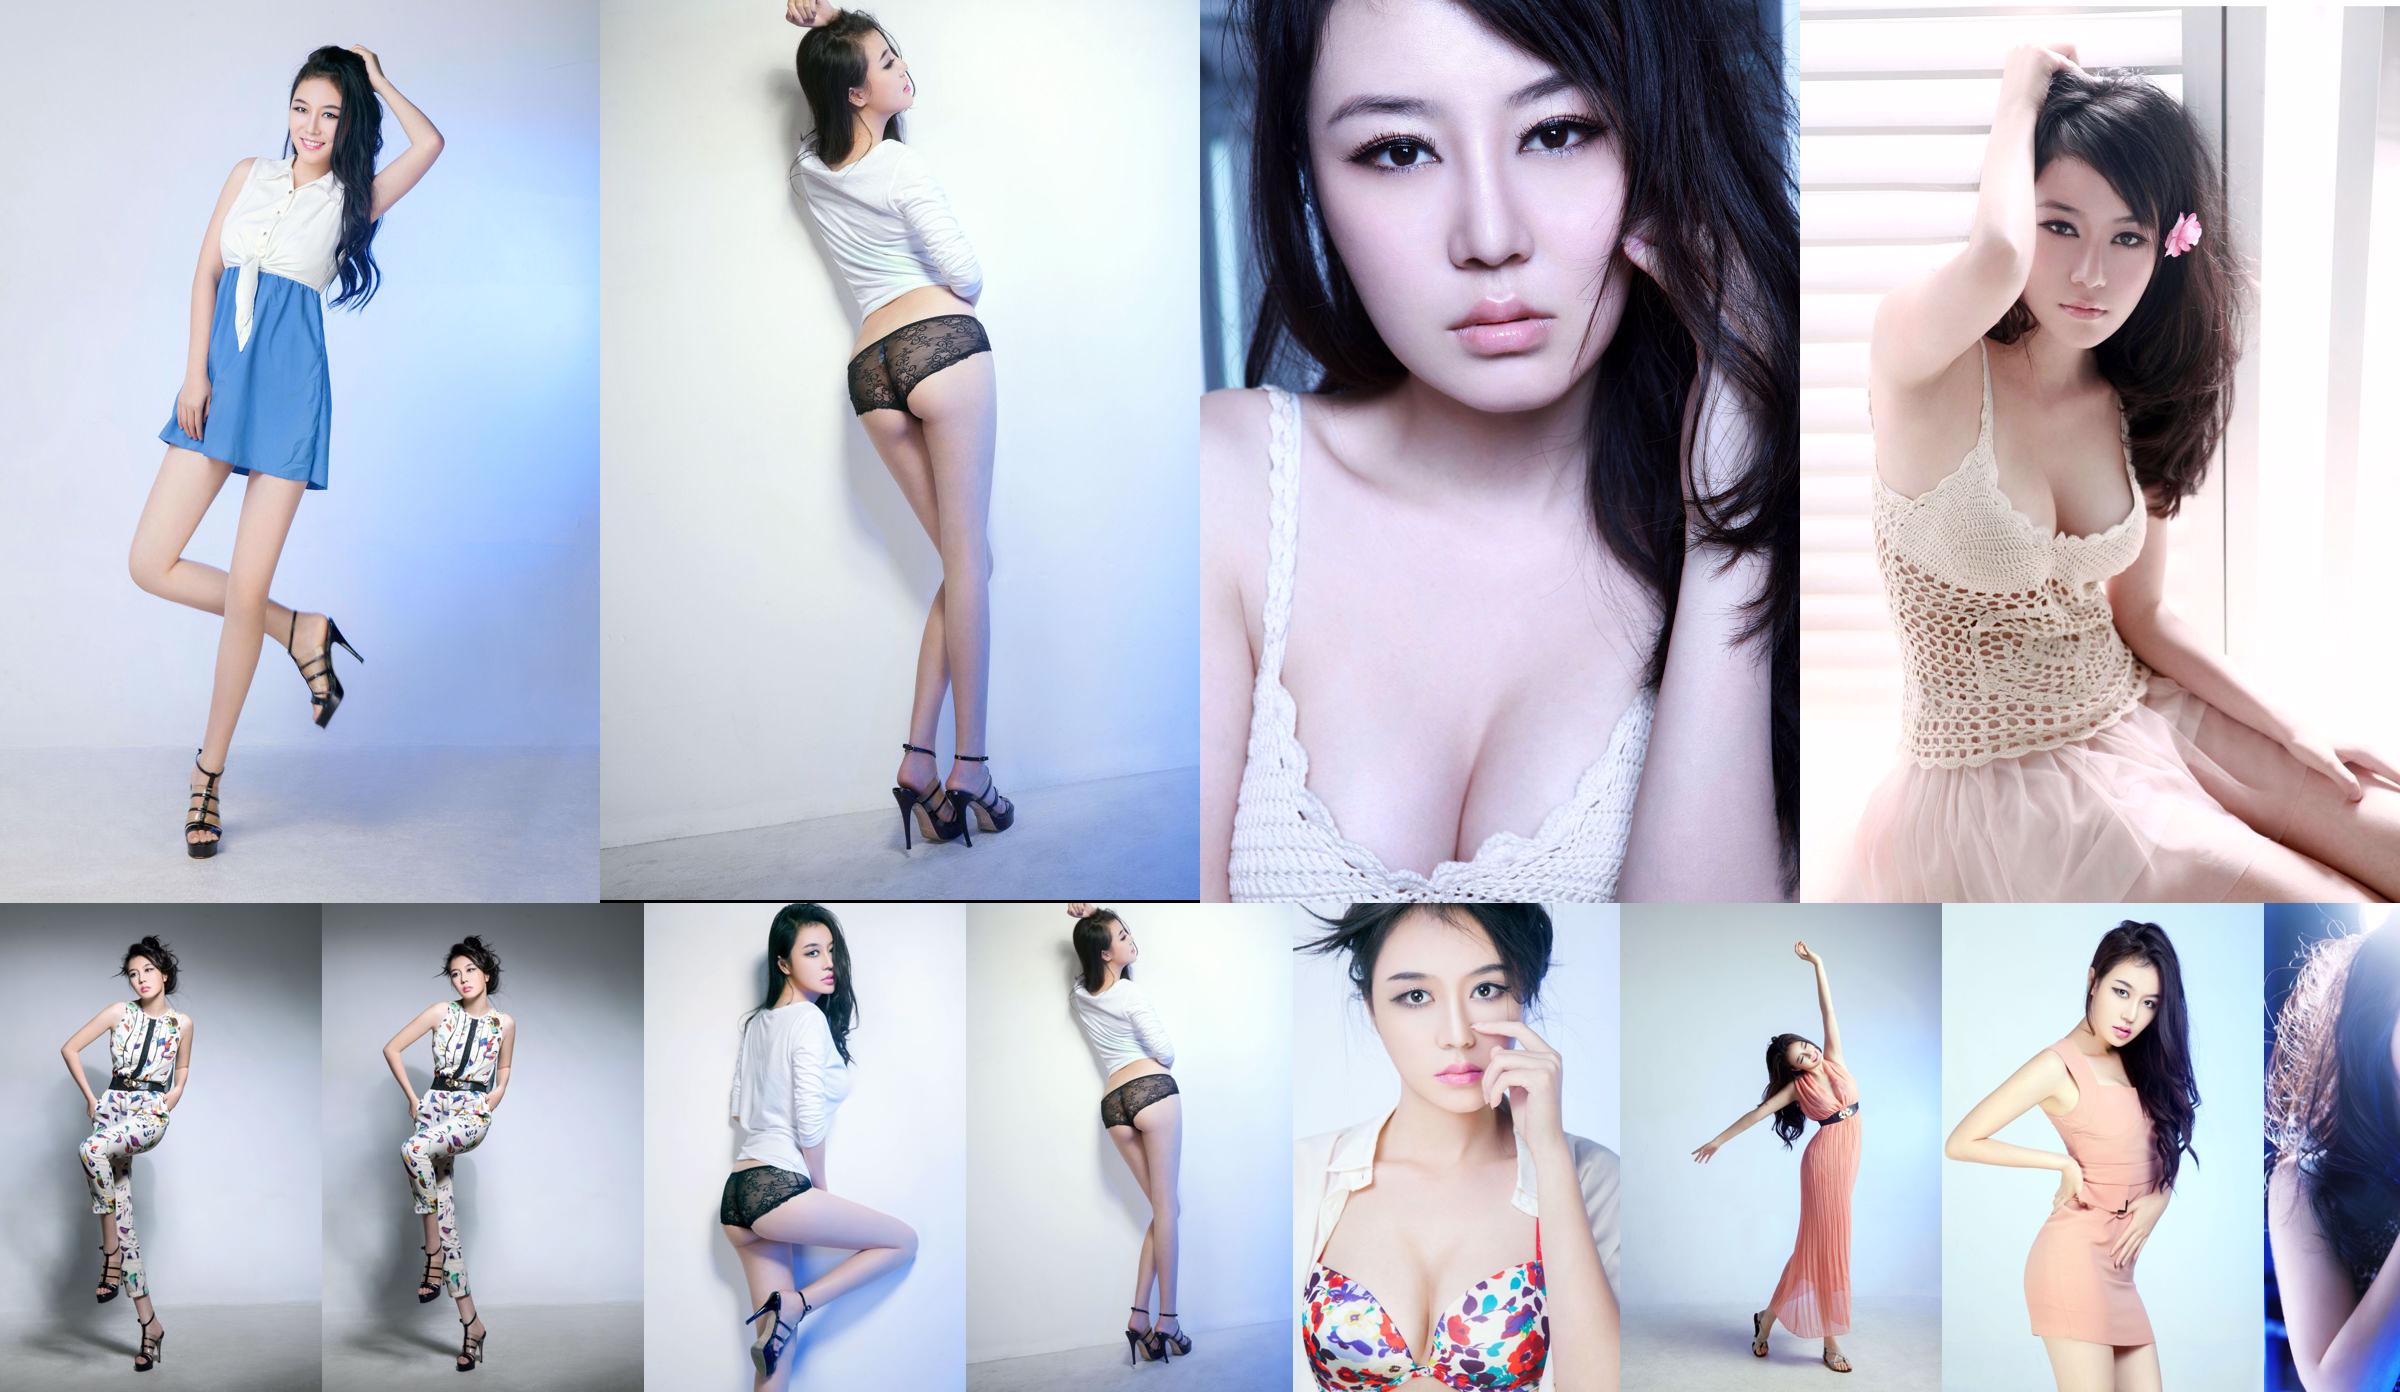 Song Zhizhen "Deep Boudoir Looking Forward to Your Lord" [Kelagirls] No.418562 Page 2